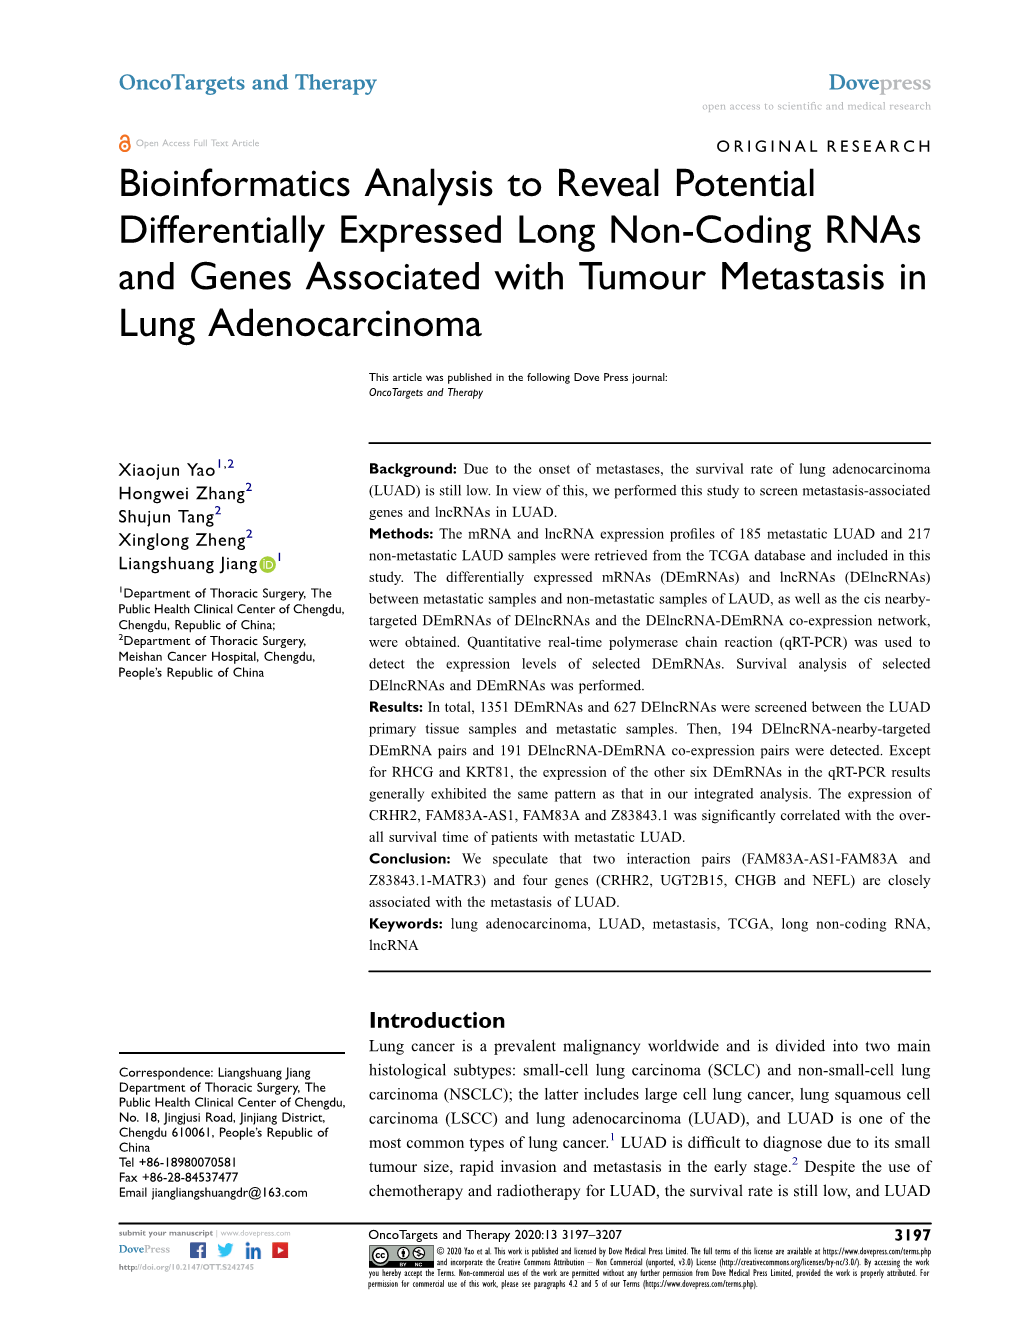 Bioinformatics Analysis to Reveal Potential Differentially Expressed Long Non-Coding Rnas and Genes Associated with Tumour Metastasis in Lung Adenocarcinoma